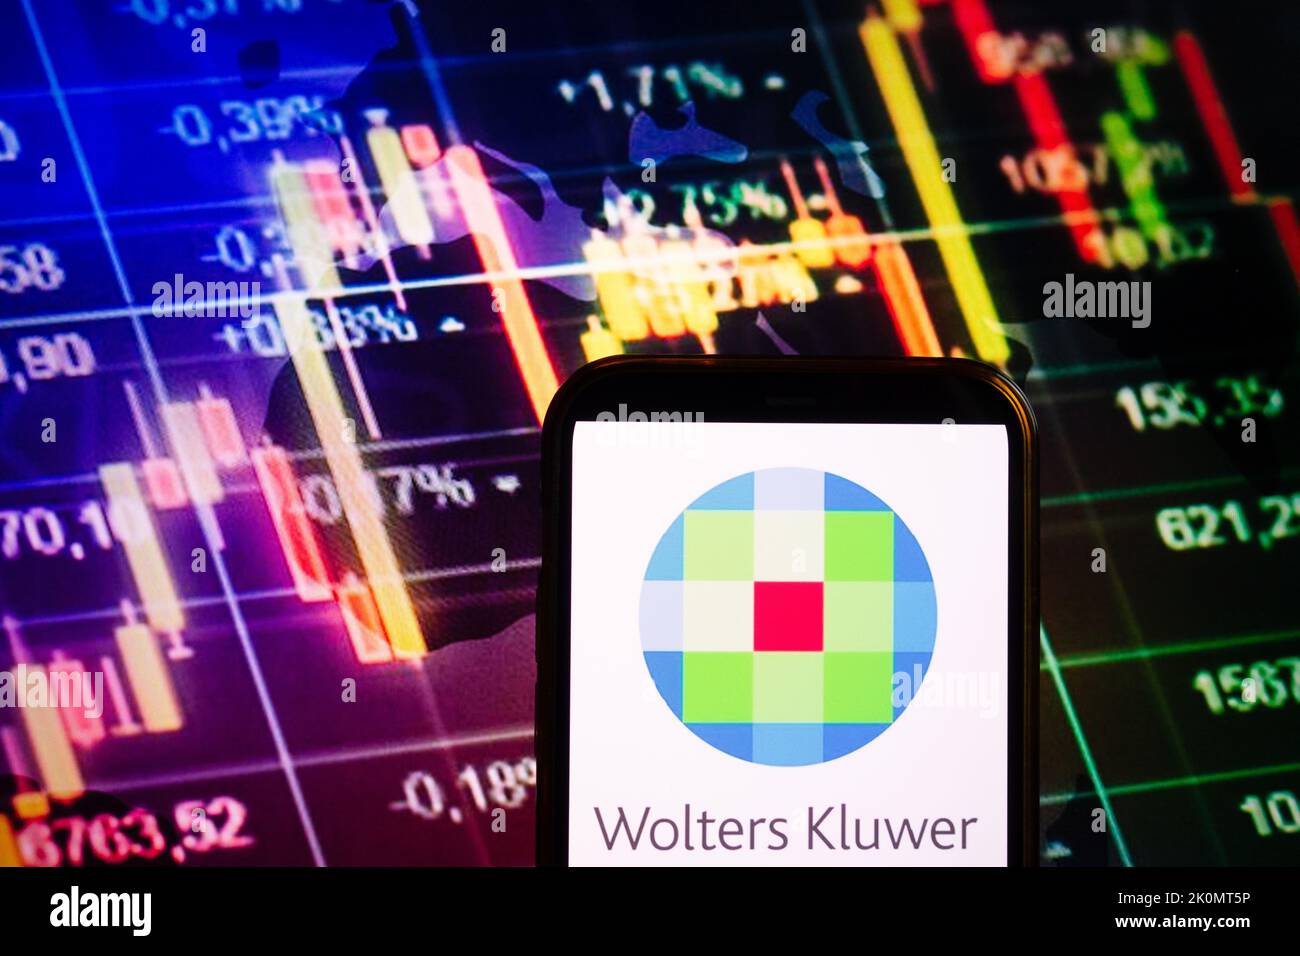 KONSKIE, POLAND - September 10, 2022: Smartphone displaying logo of Wolters Kluwer company on stock exchange diagram background Stock Photo